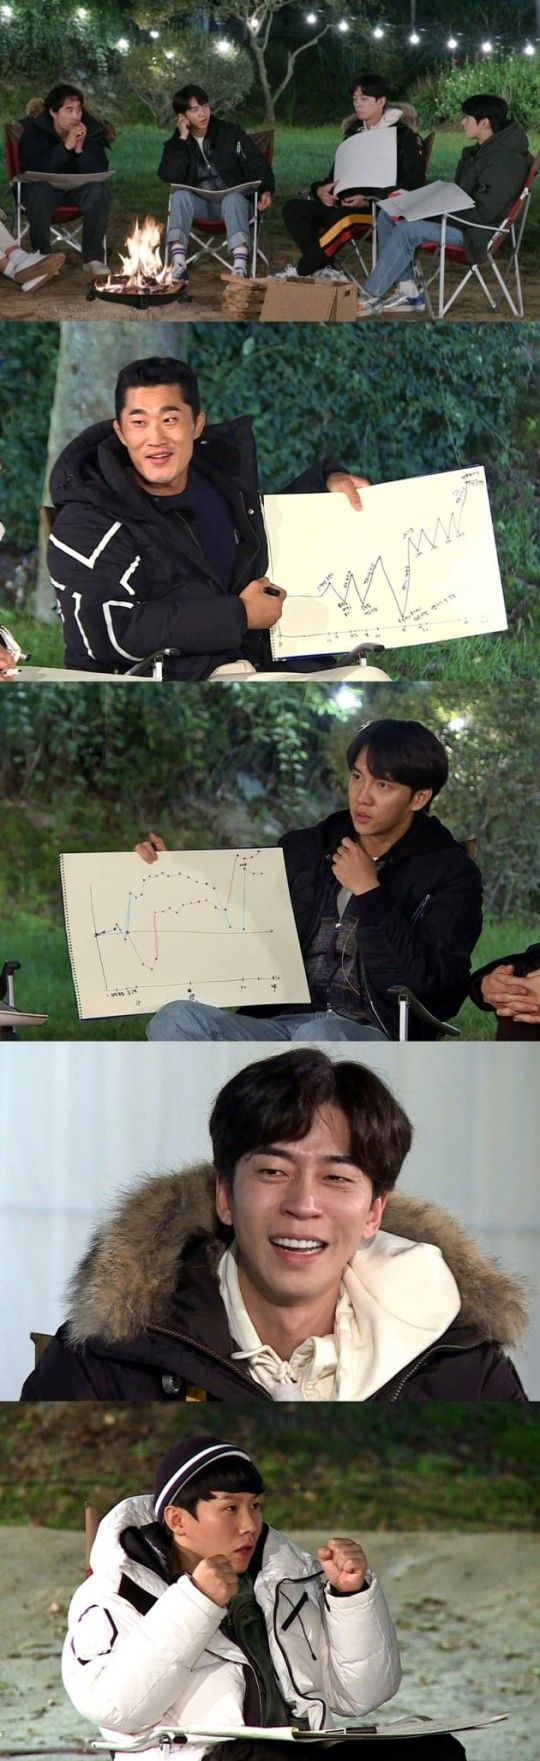 Lee Seung-gi looks back on her life.On SBS All The Butlers broadcasted on the 25th, life graphs of Bae Seong-woo and Lee Seung-gi, Yang Se-hyeong, Shin Sung-rok, Cha Eun-woo and Kim Dong-Hyun are released.According to the production crew, when the night of camping was ripe, Bae Seong-woo and All The Butlers members shared their lives by drawing life graphs.They draw attention by revealing the graph and saying that they have been openly confident about their life bends.Lee Seung-gi said, I did not hear the voice of my mind in the past, Confessions said, frankly revealing the hardest days of my life, and Fighter Kim Dong-Hyun said about his days of quitting exercise for a while and working on part-time jobs such as PC rooms and blocked sewers.In particular, Shin Sung-rok was looking at his graph and Bae Seong-woo said, (Shin Sung-rok) worked really hard, and he was full of fighting.I felt such an energy and I was so cool and envious. I lived without knowing who I am these days, he said. I miss the past, he said. I missed my new days, full of passion, without knowing anything.6:25 p.m.